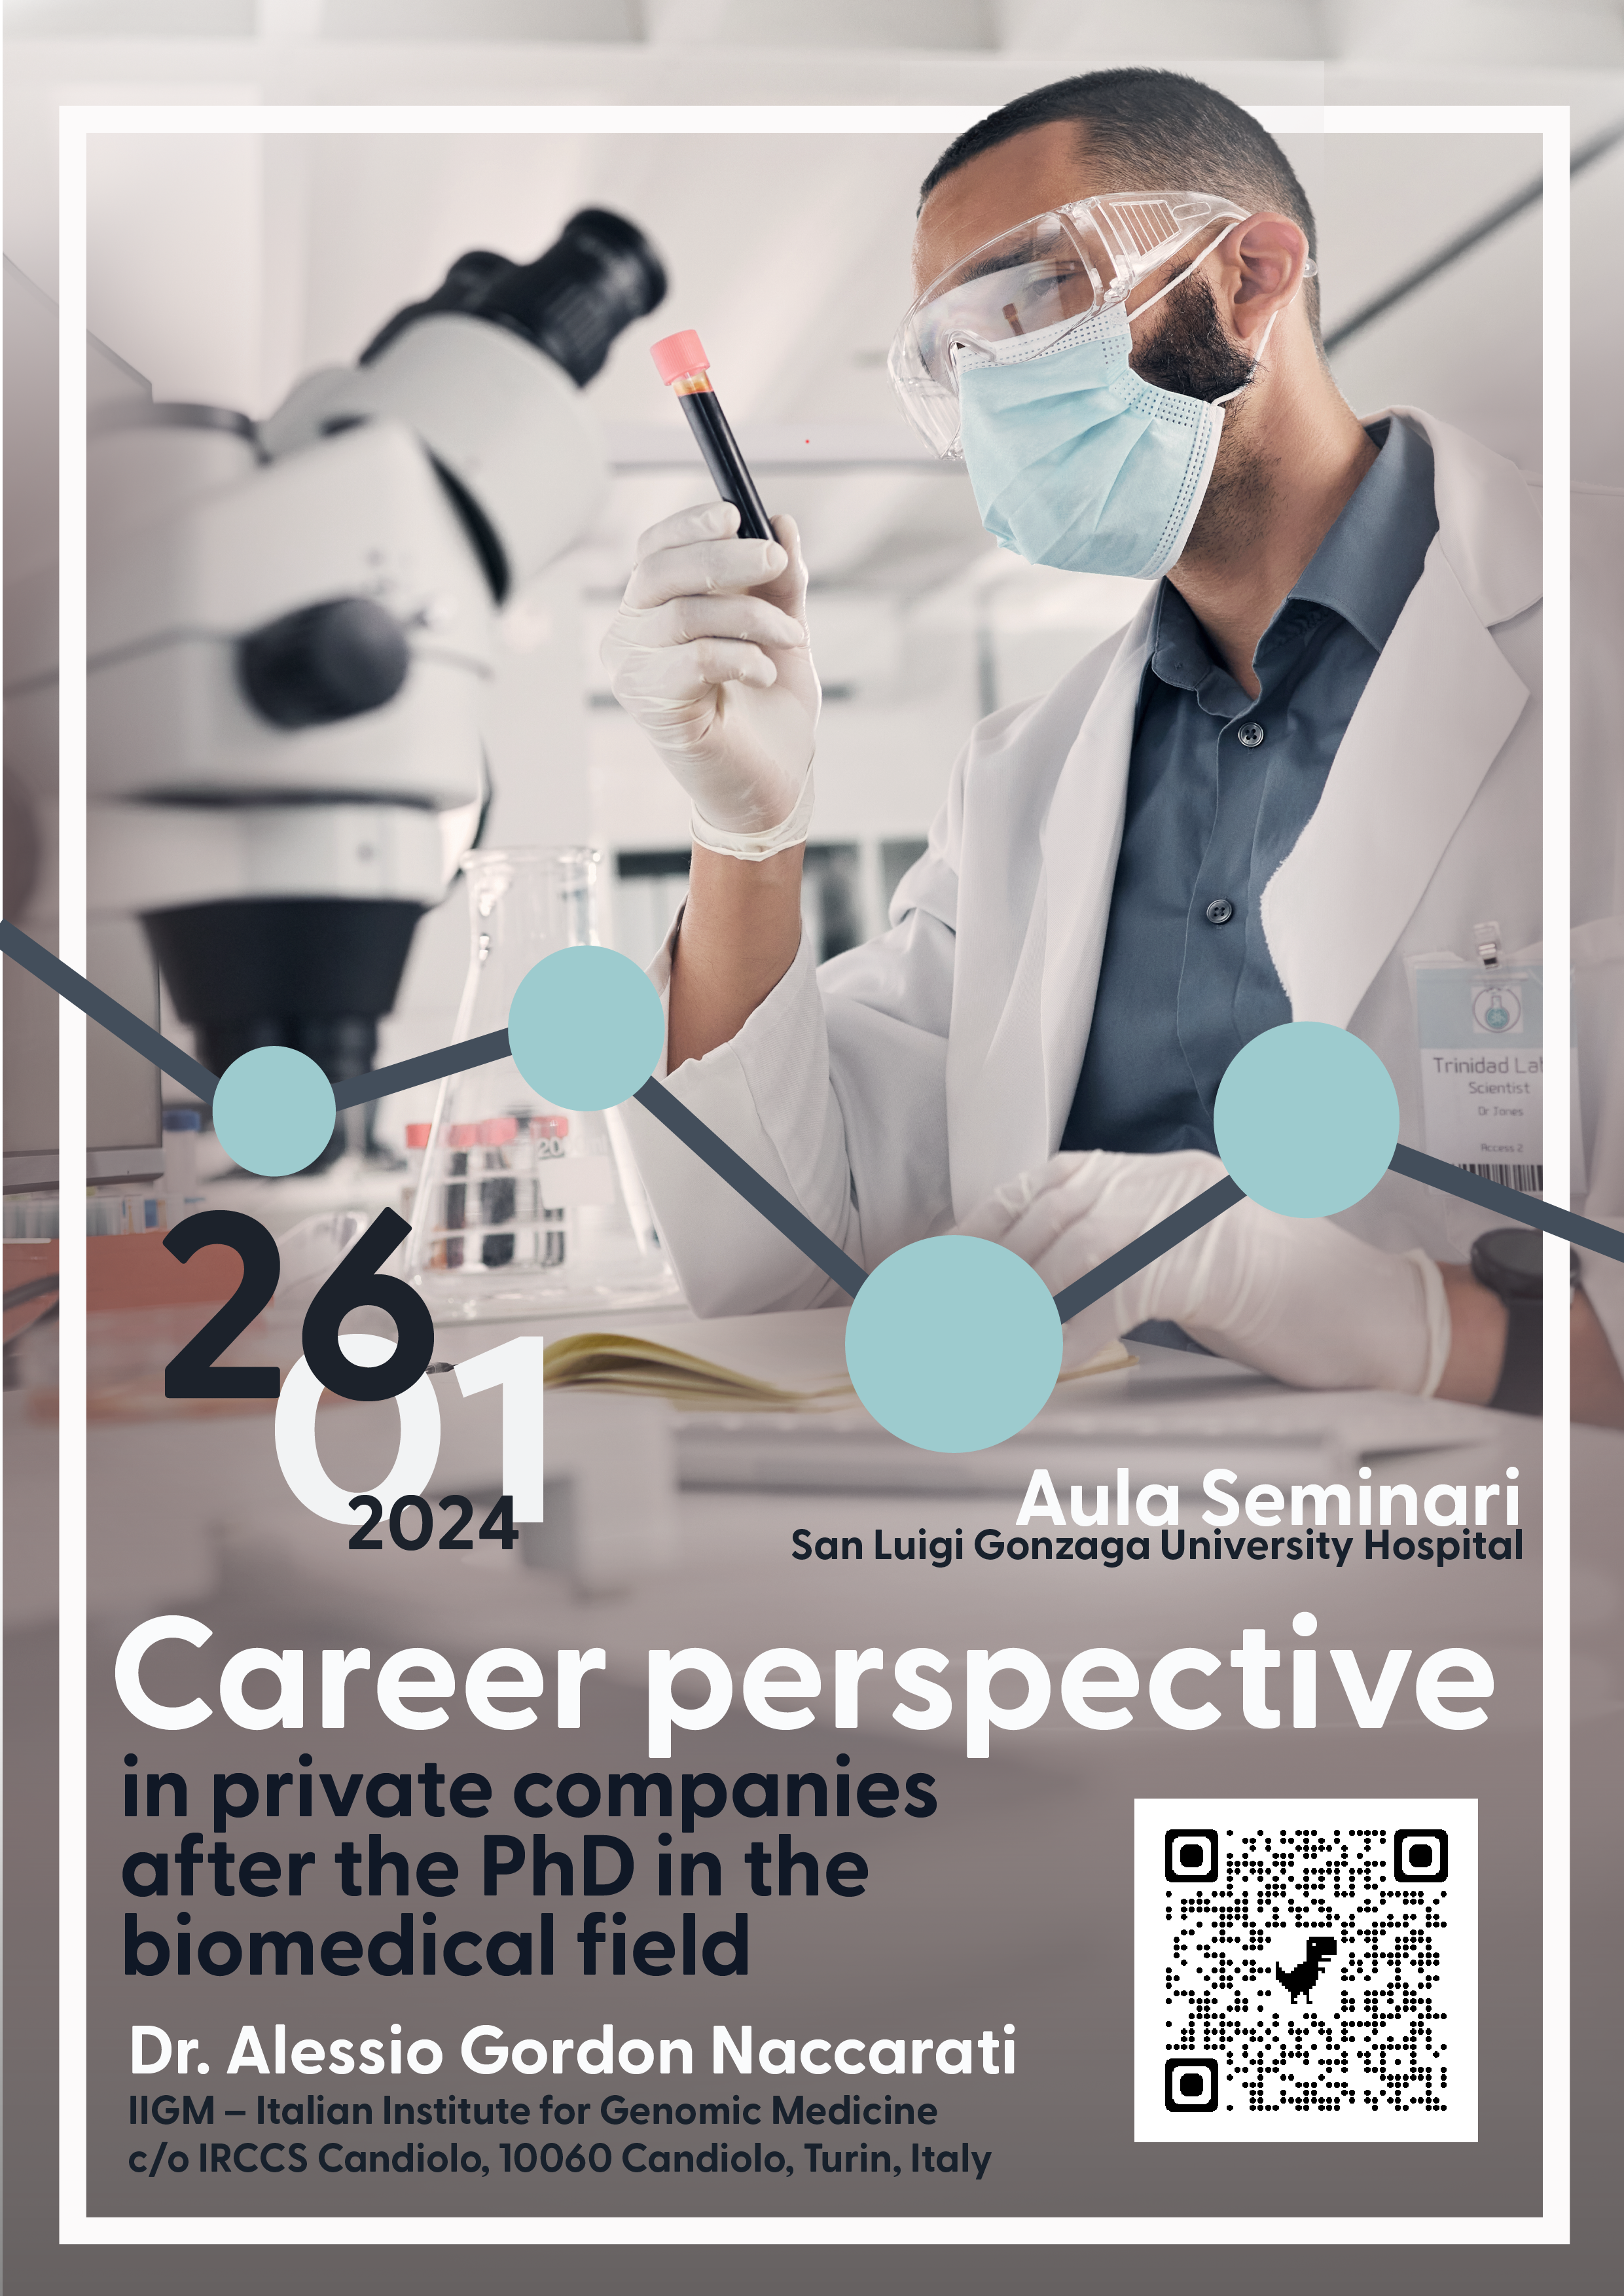 Career perspective in private companies after PhD in the biomedical field